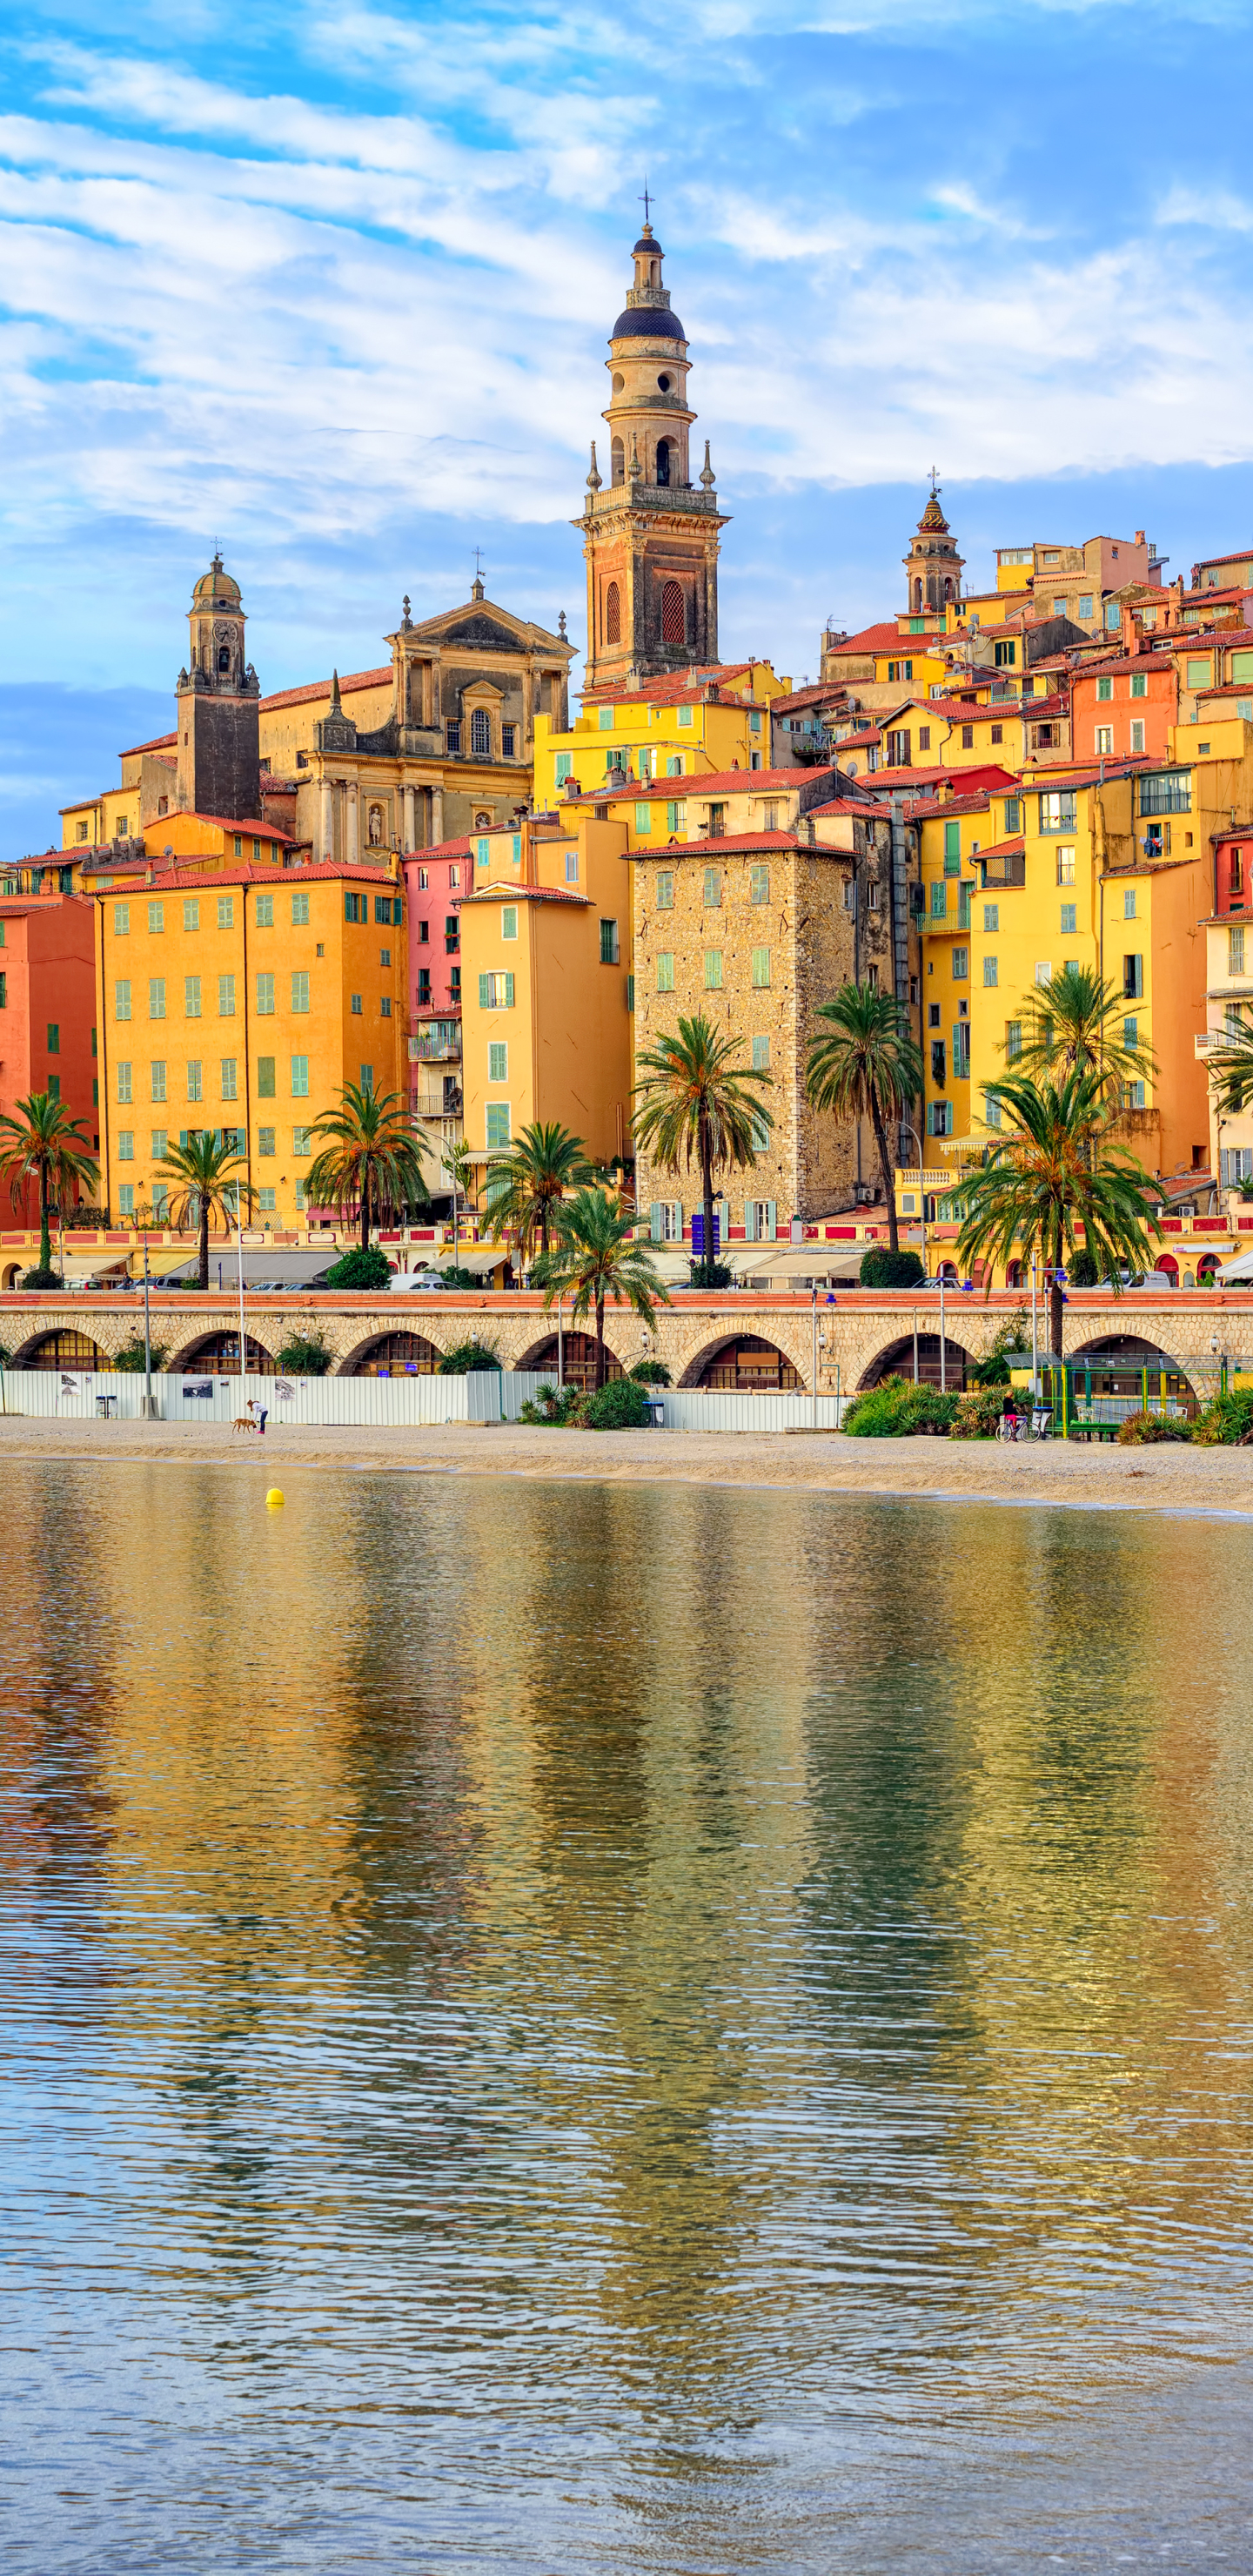 Menton, France on the French Riviera ("The Pearl of the Sea)